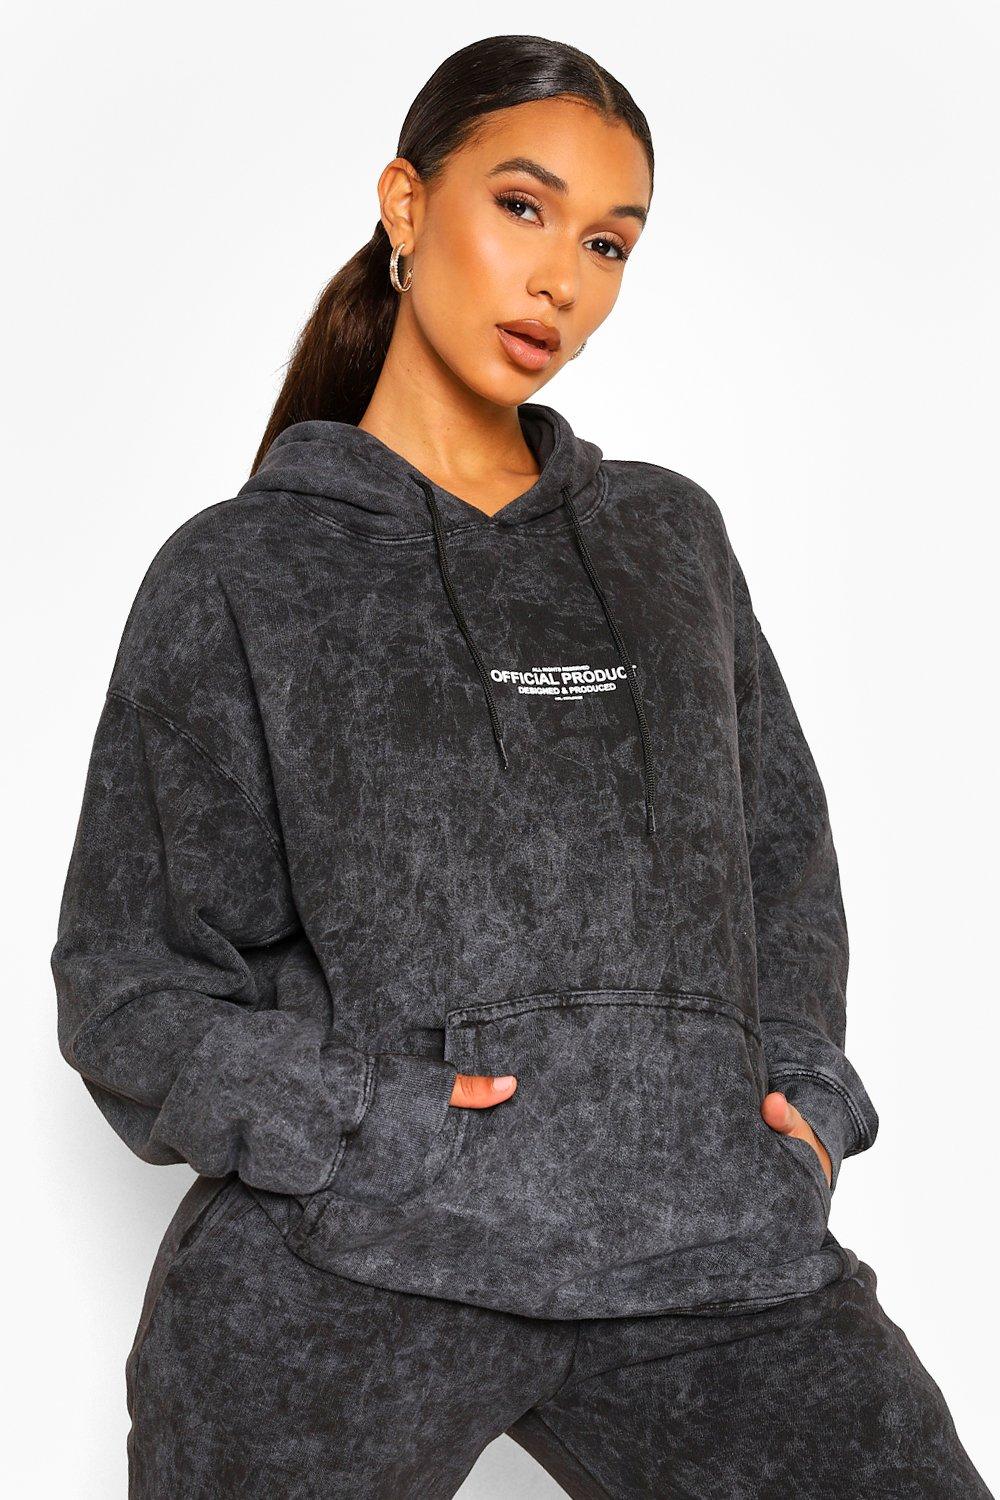 Acid Wash Official Product Oversized Hoodie   boohoo